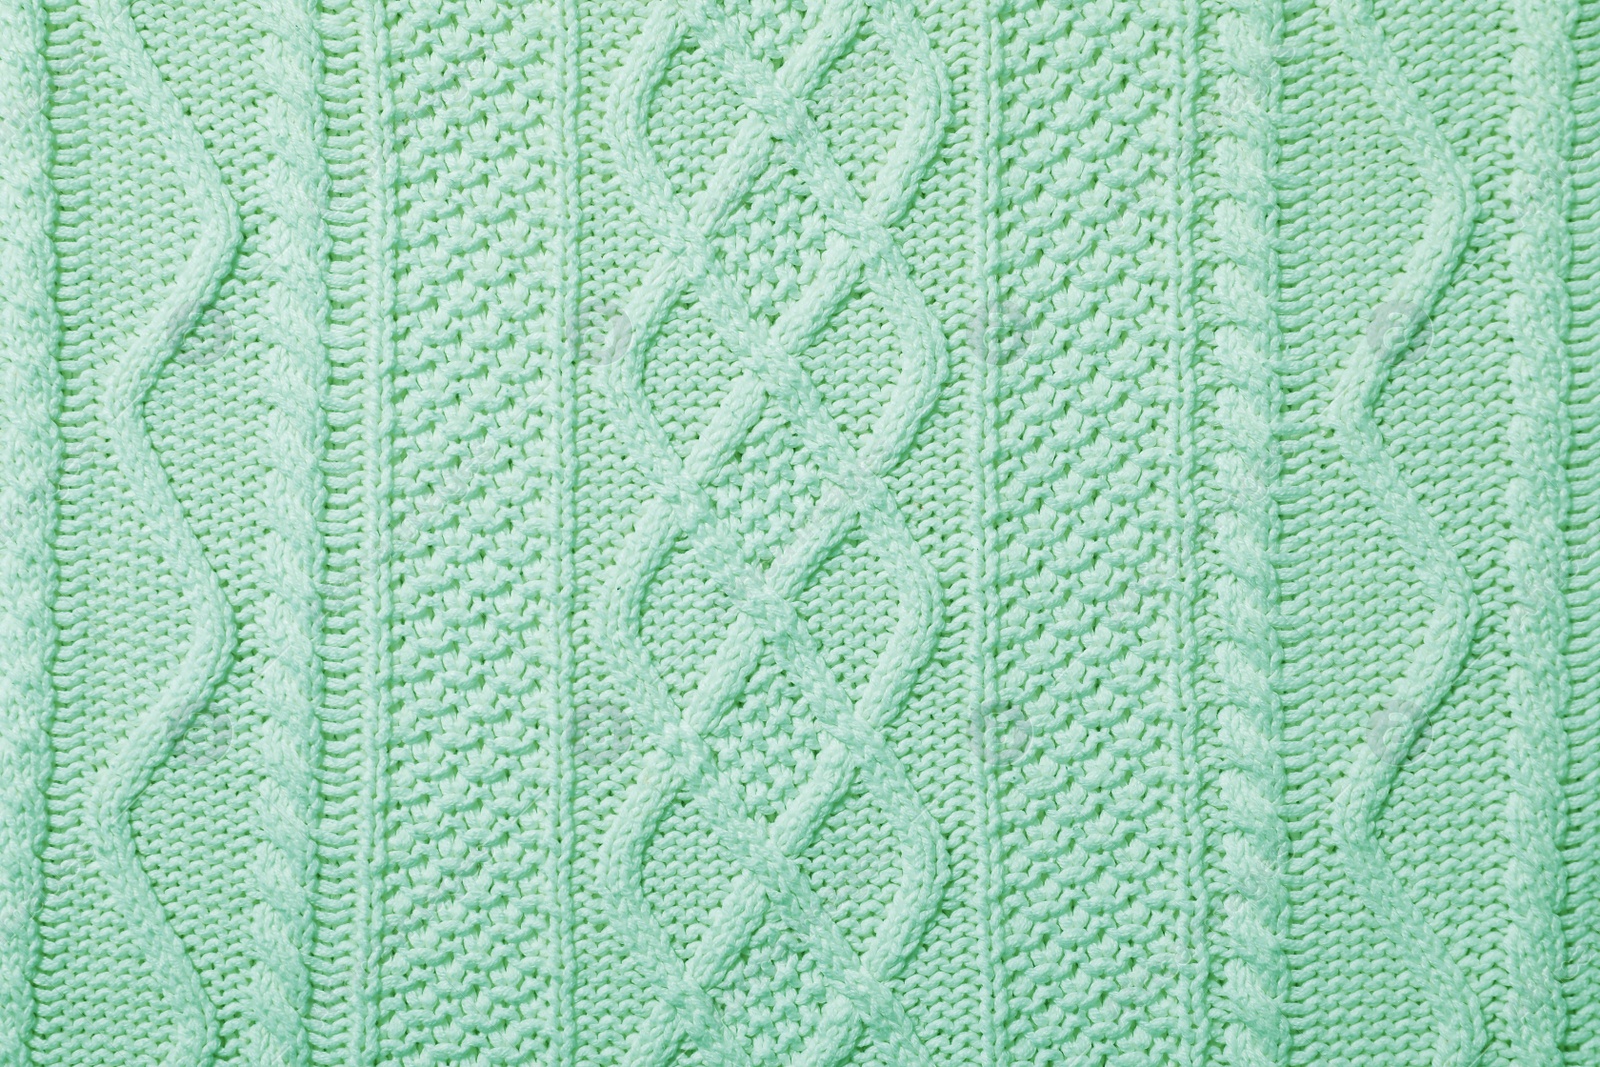 Image of Surface of winter clothing as background. Image toned in mint color 